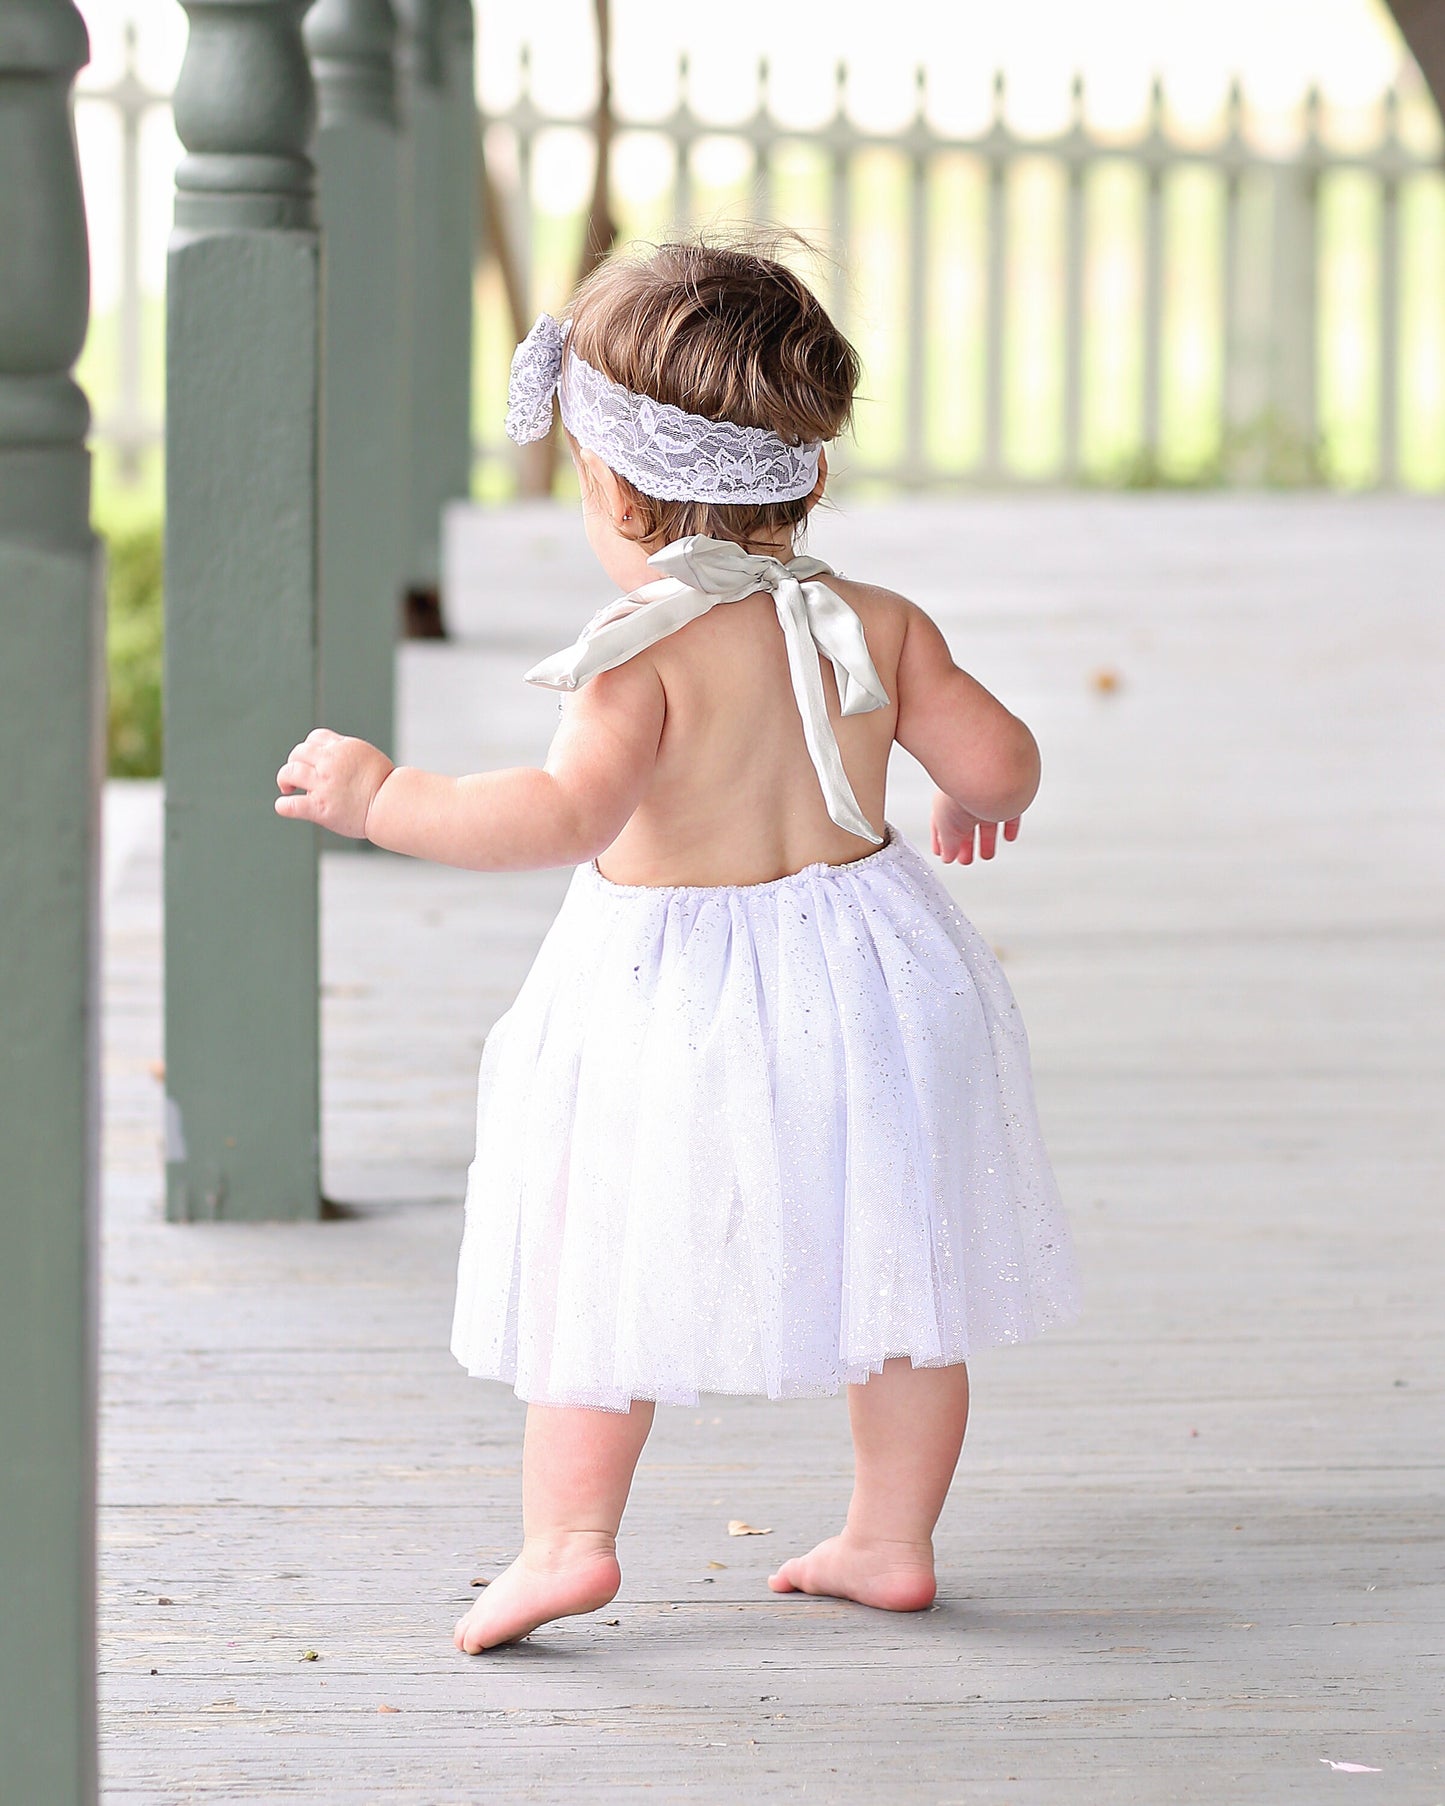 Silver Sequin Skirted Romper 0-6 months - Tulle skirt, romper - Sequin Romper, Birthday Romper - birthday, baby photo shoot, birthday outfit